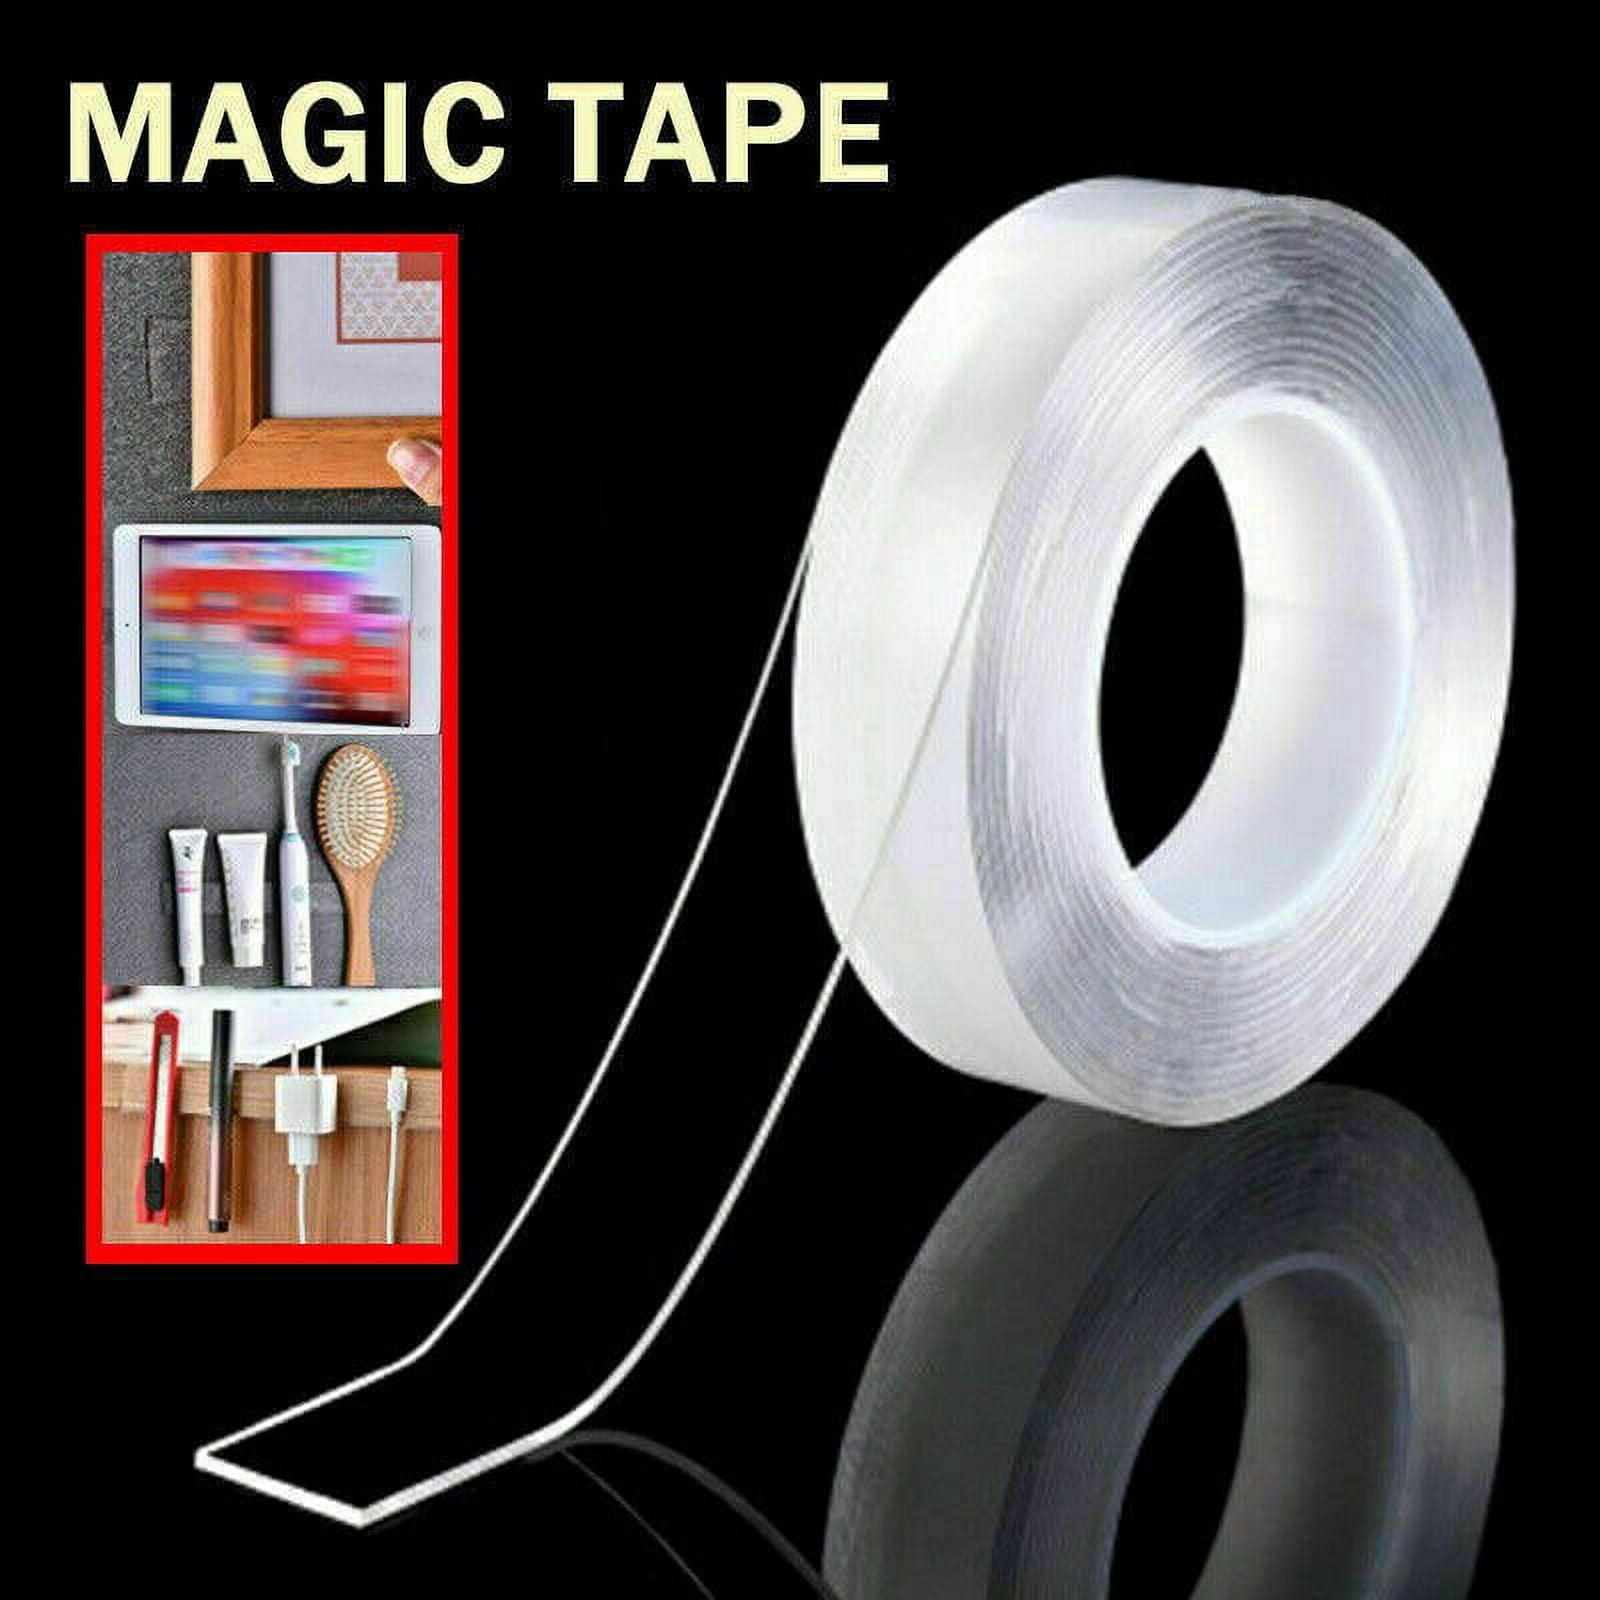 XFasten Double Sided Tape Clear Removable 1-Inch by 20-Yards Pack of 3 Ideal As A Gift Wrap Tape Holding Carpets and Woodworking